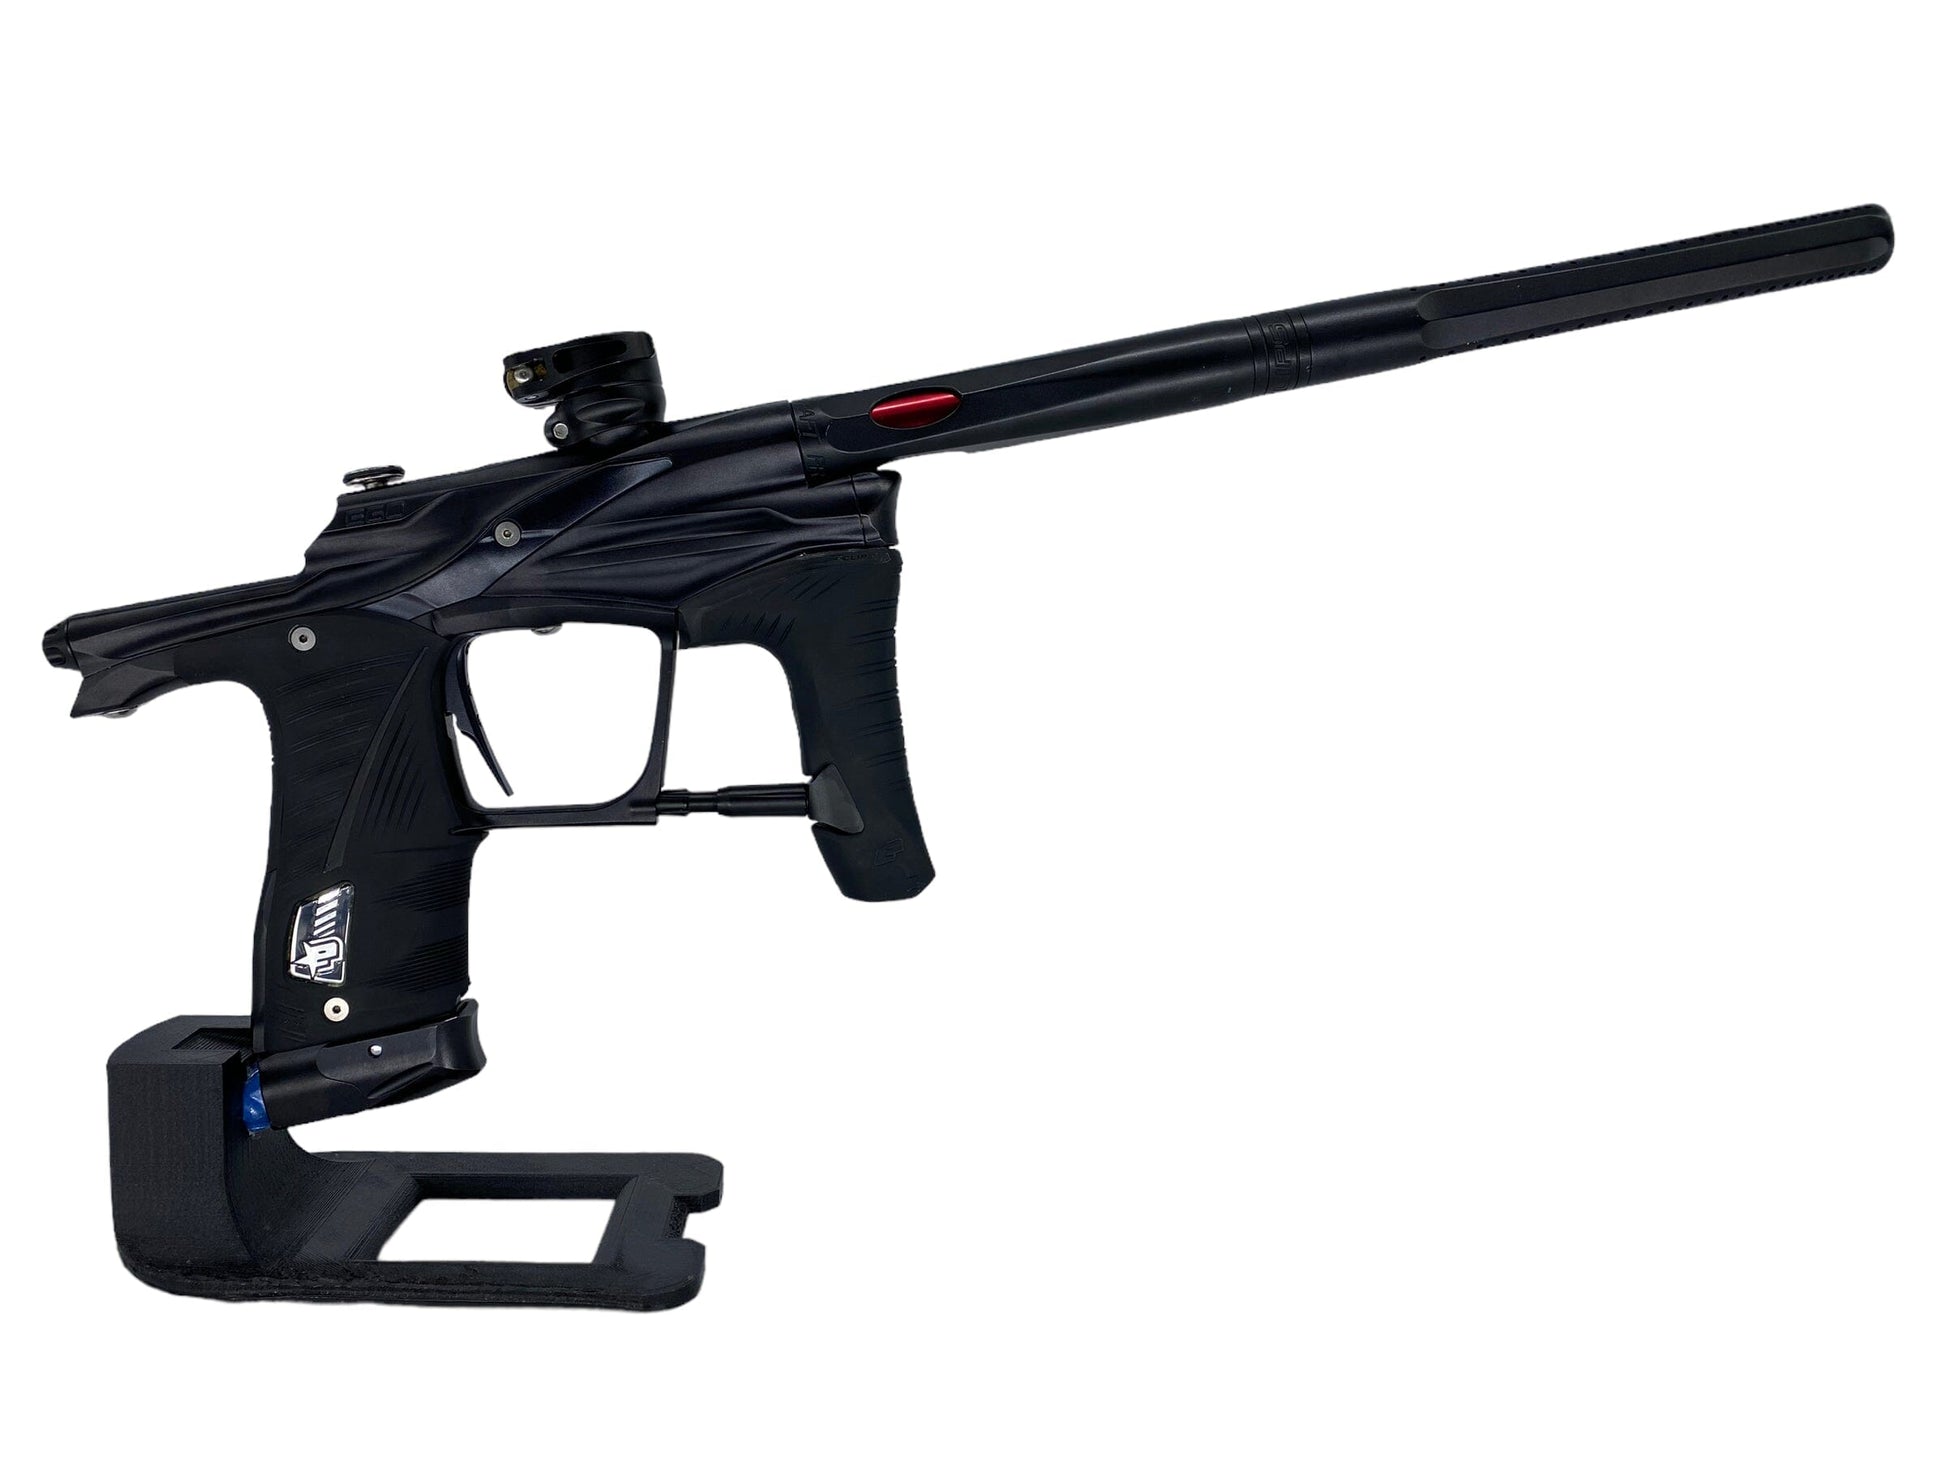 Used Planet Eclipse Lv1 Paintball Gun from CPXBrosPaintball Buy/Sell/Trade Paintball Markers, Paintball Hoppers, Paintball Masks, and Hormesis Headbands